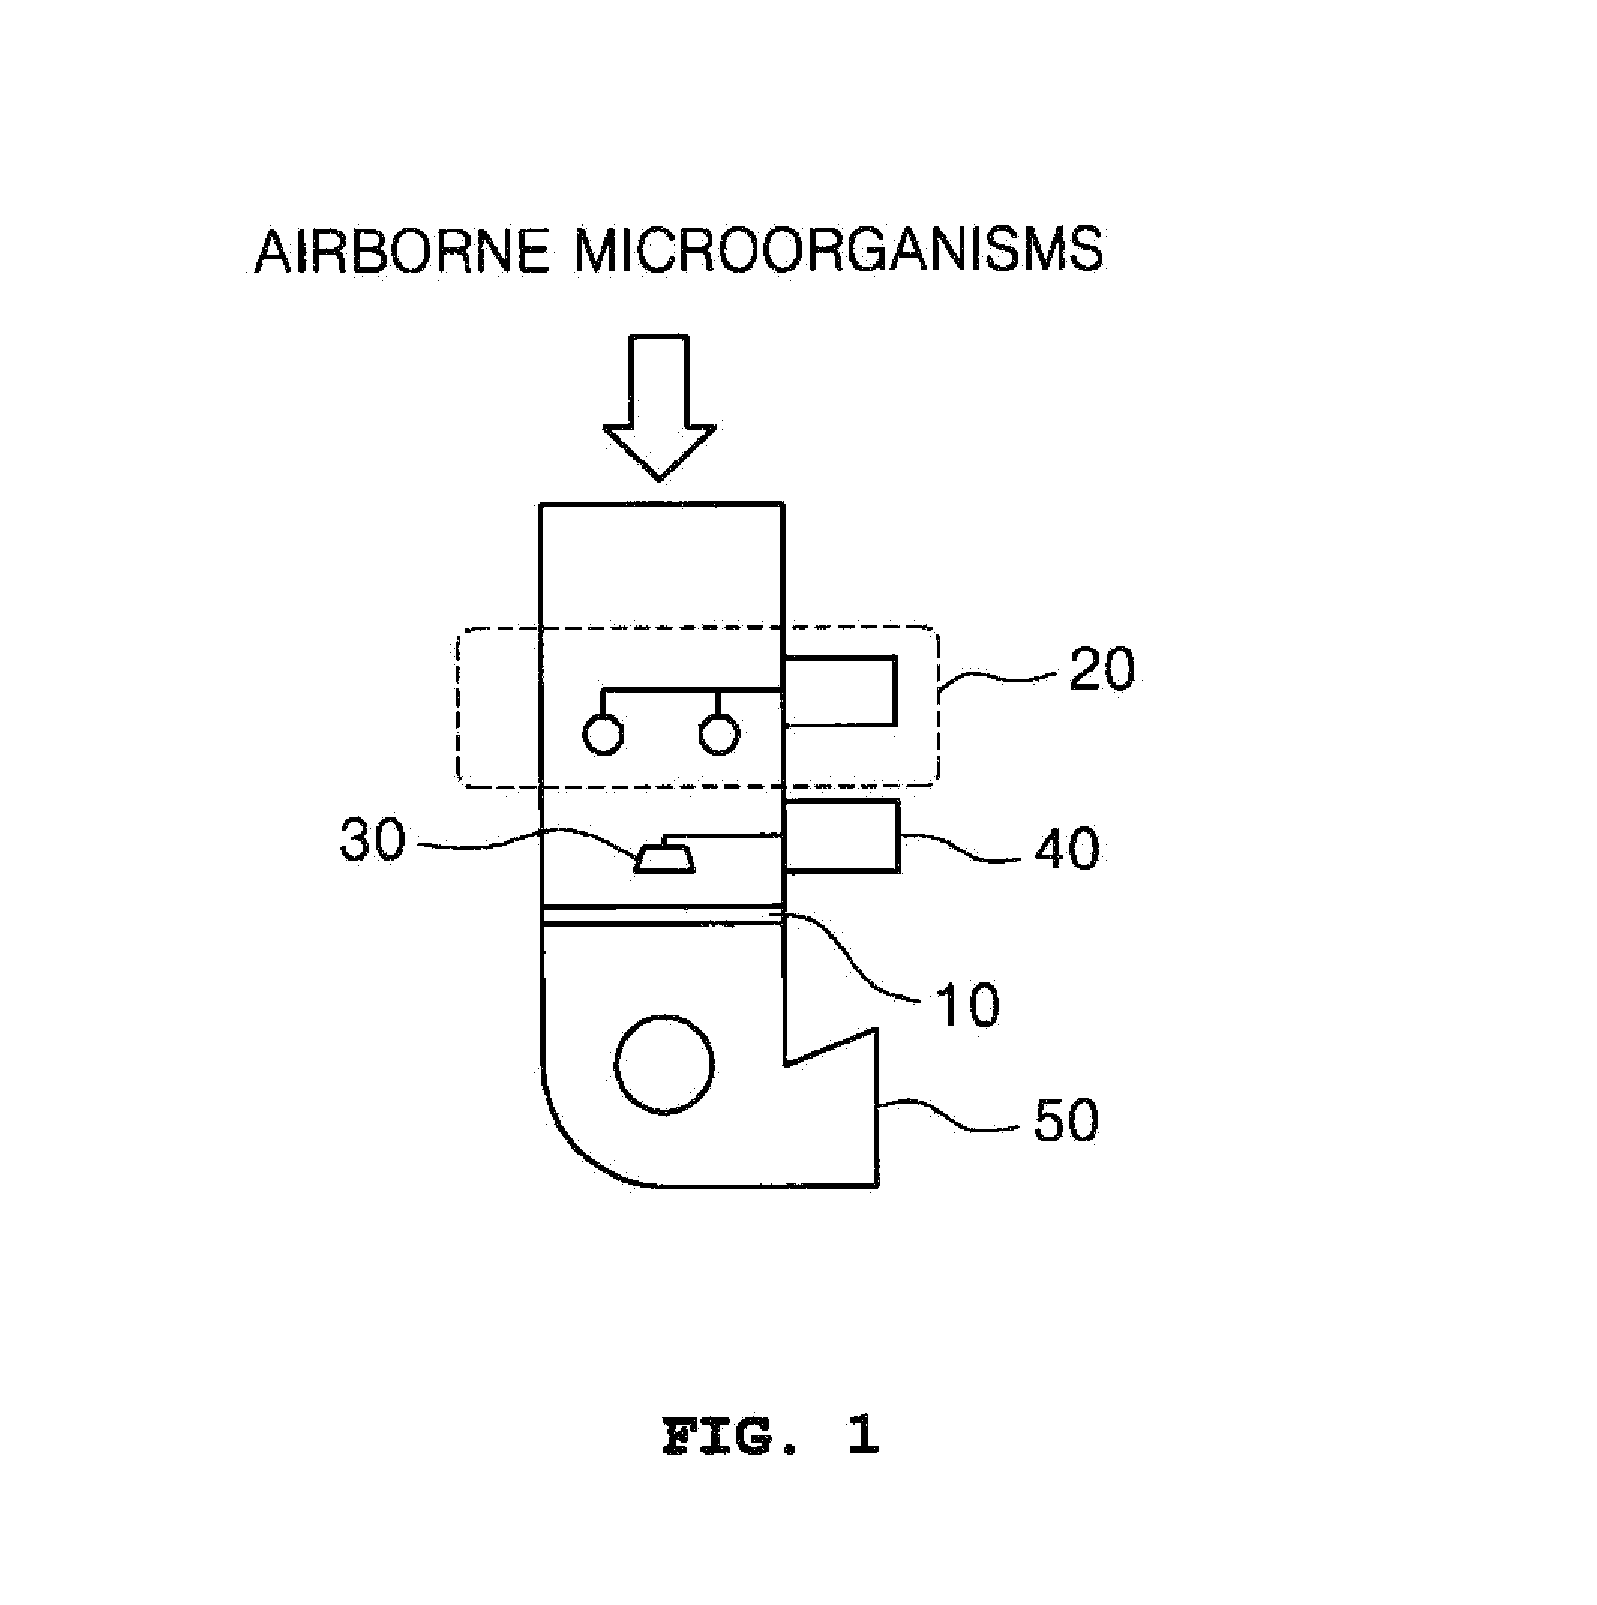 Apparatus for measuring floating microorganisms in a gas phase in real time using a system for dissolving microorganisms and atp illumination, and method for detecting same